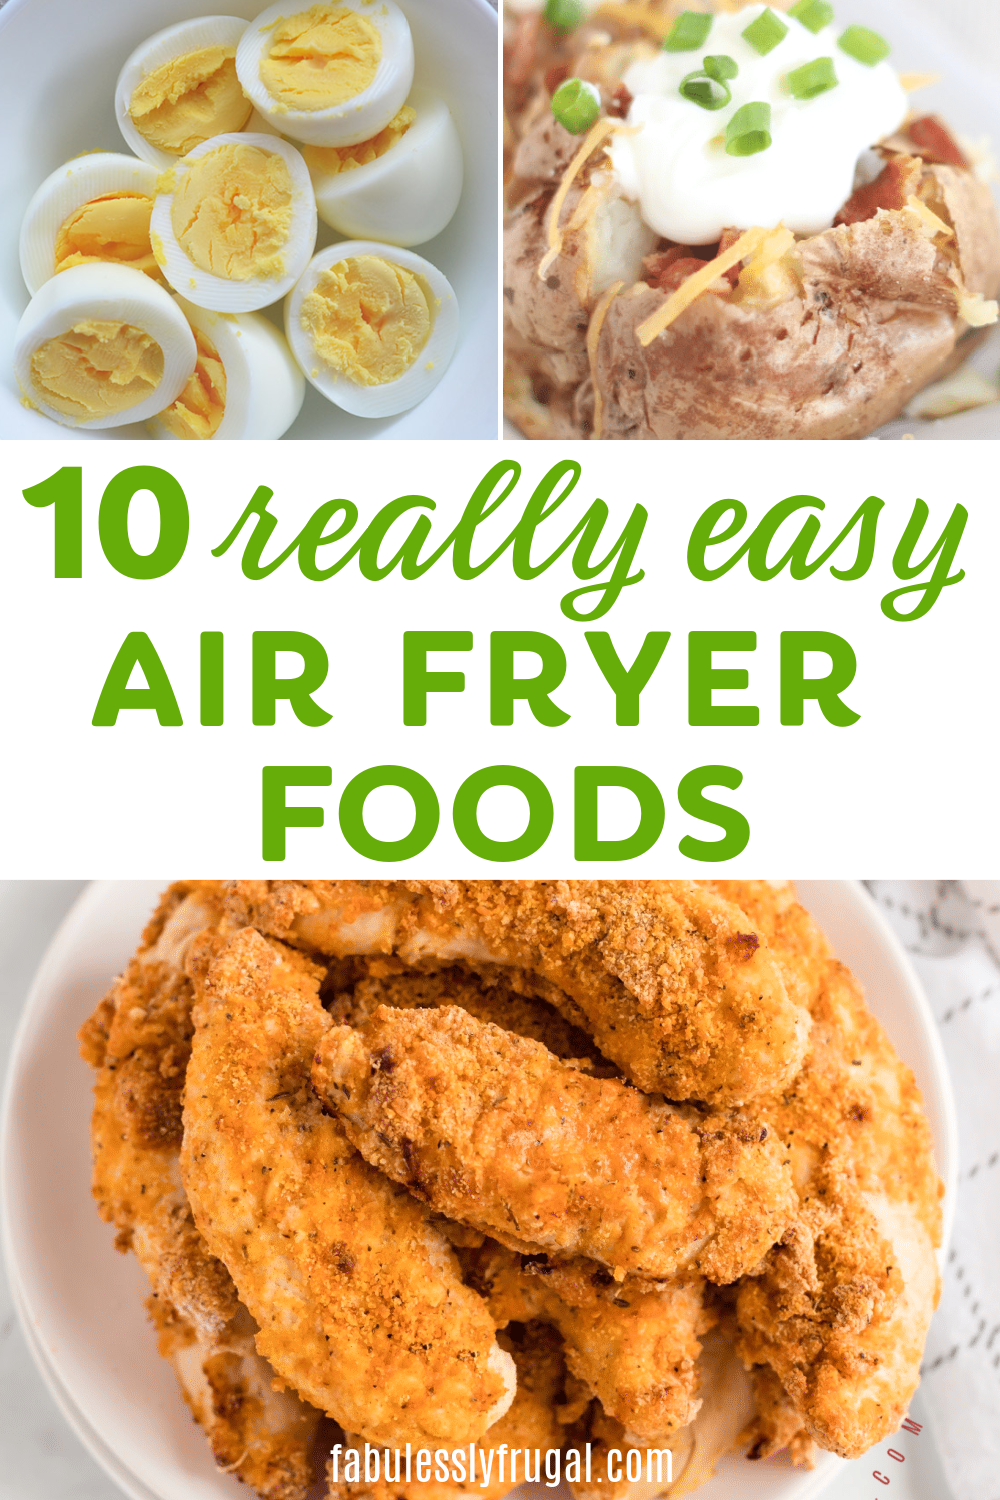 https://fabulesslyfrugal.com/wp-content/uploads/2020/11/10-really-easy-air-fryer-foods-1.png